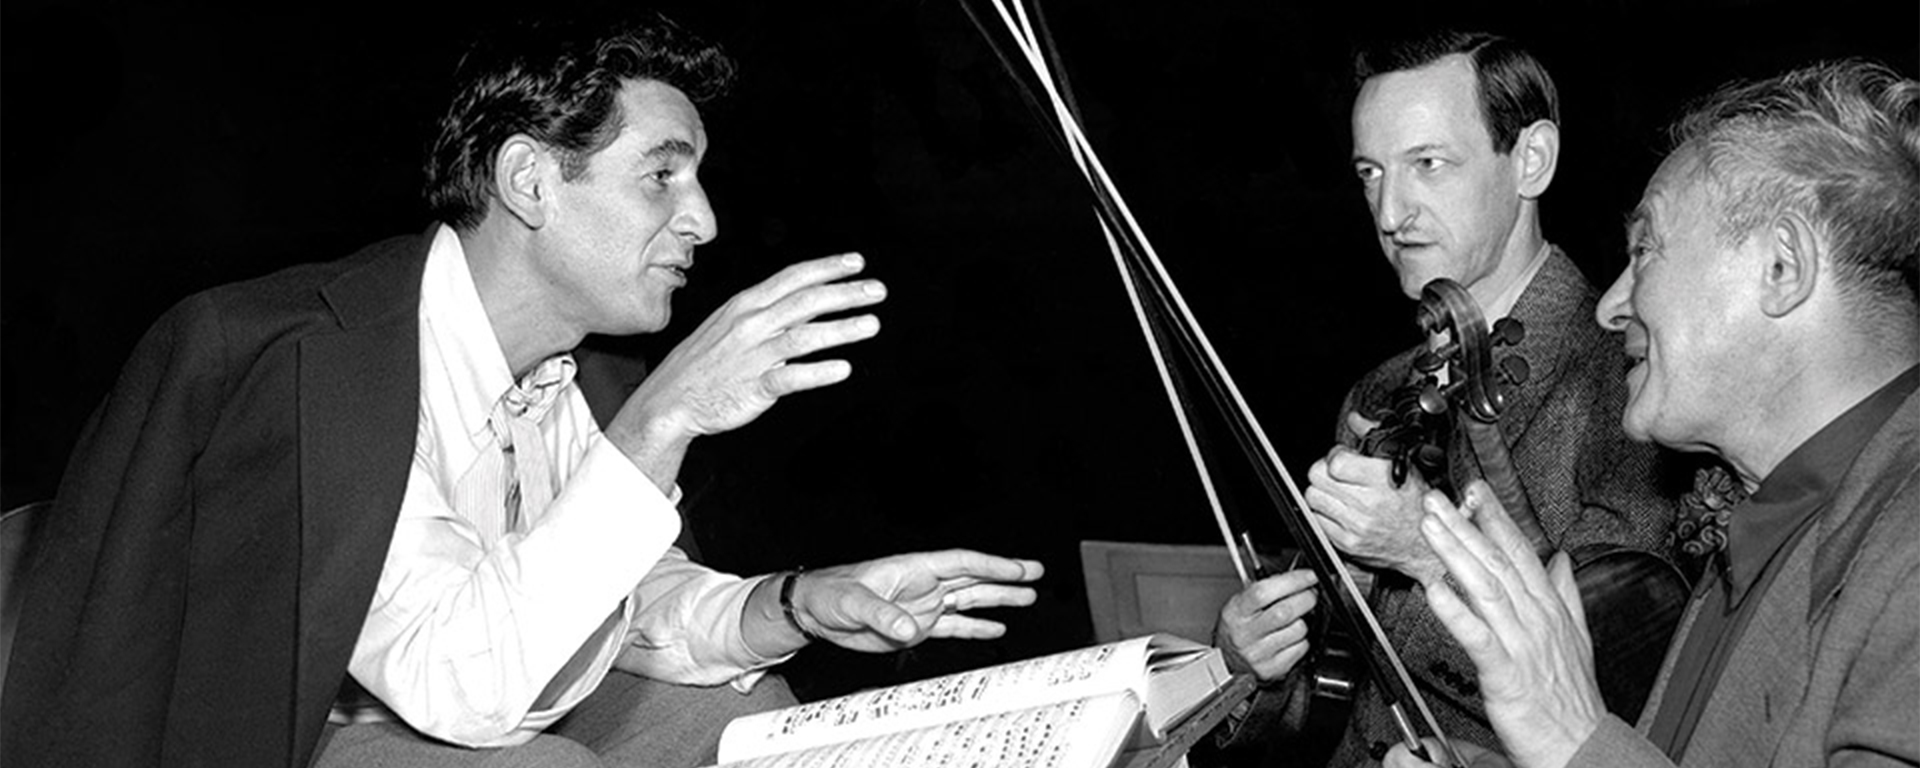 Leonard Bernstein (left) rehearses at Brandeis for the Festival of the Arts with members of the Boston Symphony Orchestra, 1952.